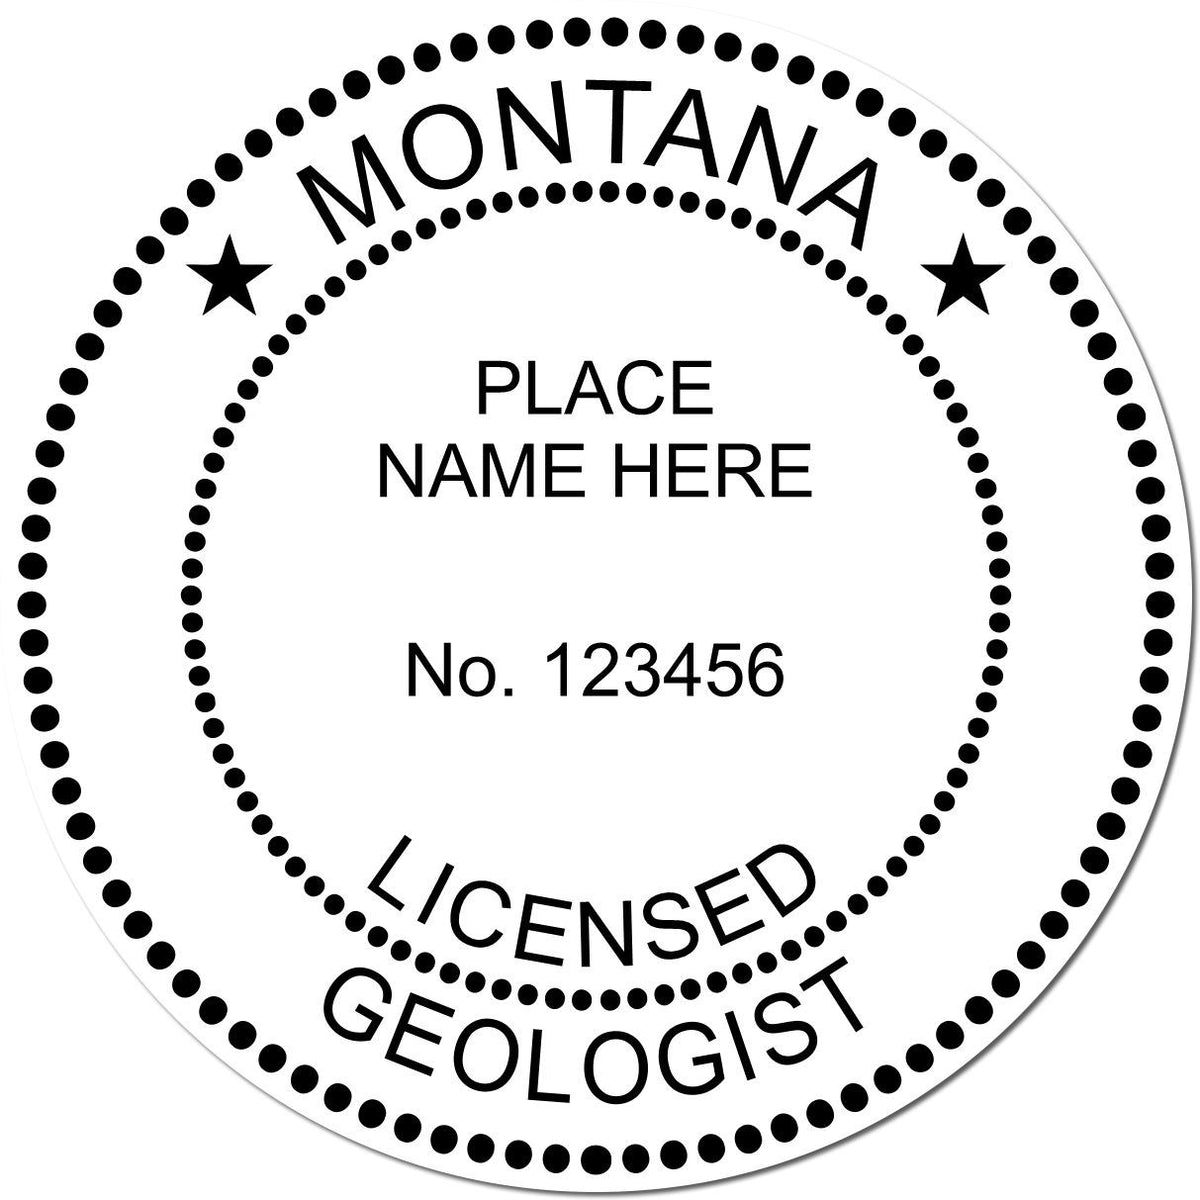 This paper is stamped with a sample imprint of the Montana Professional Geologist Seal Stamp, signifying its quality and reliability.